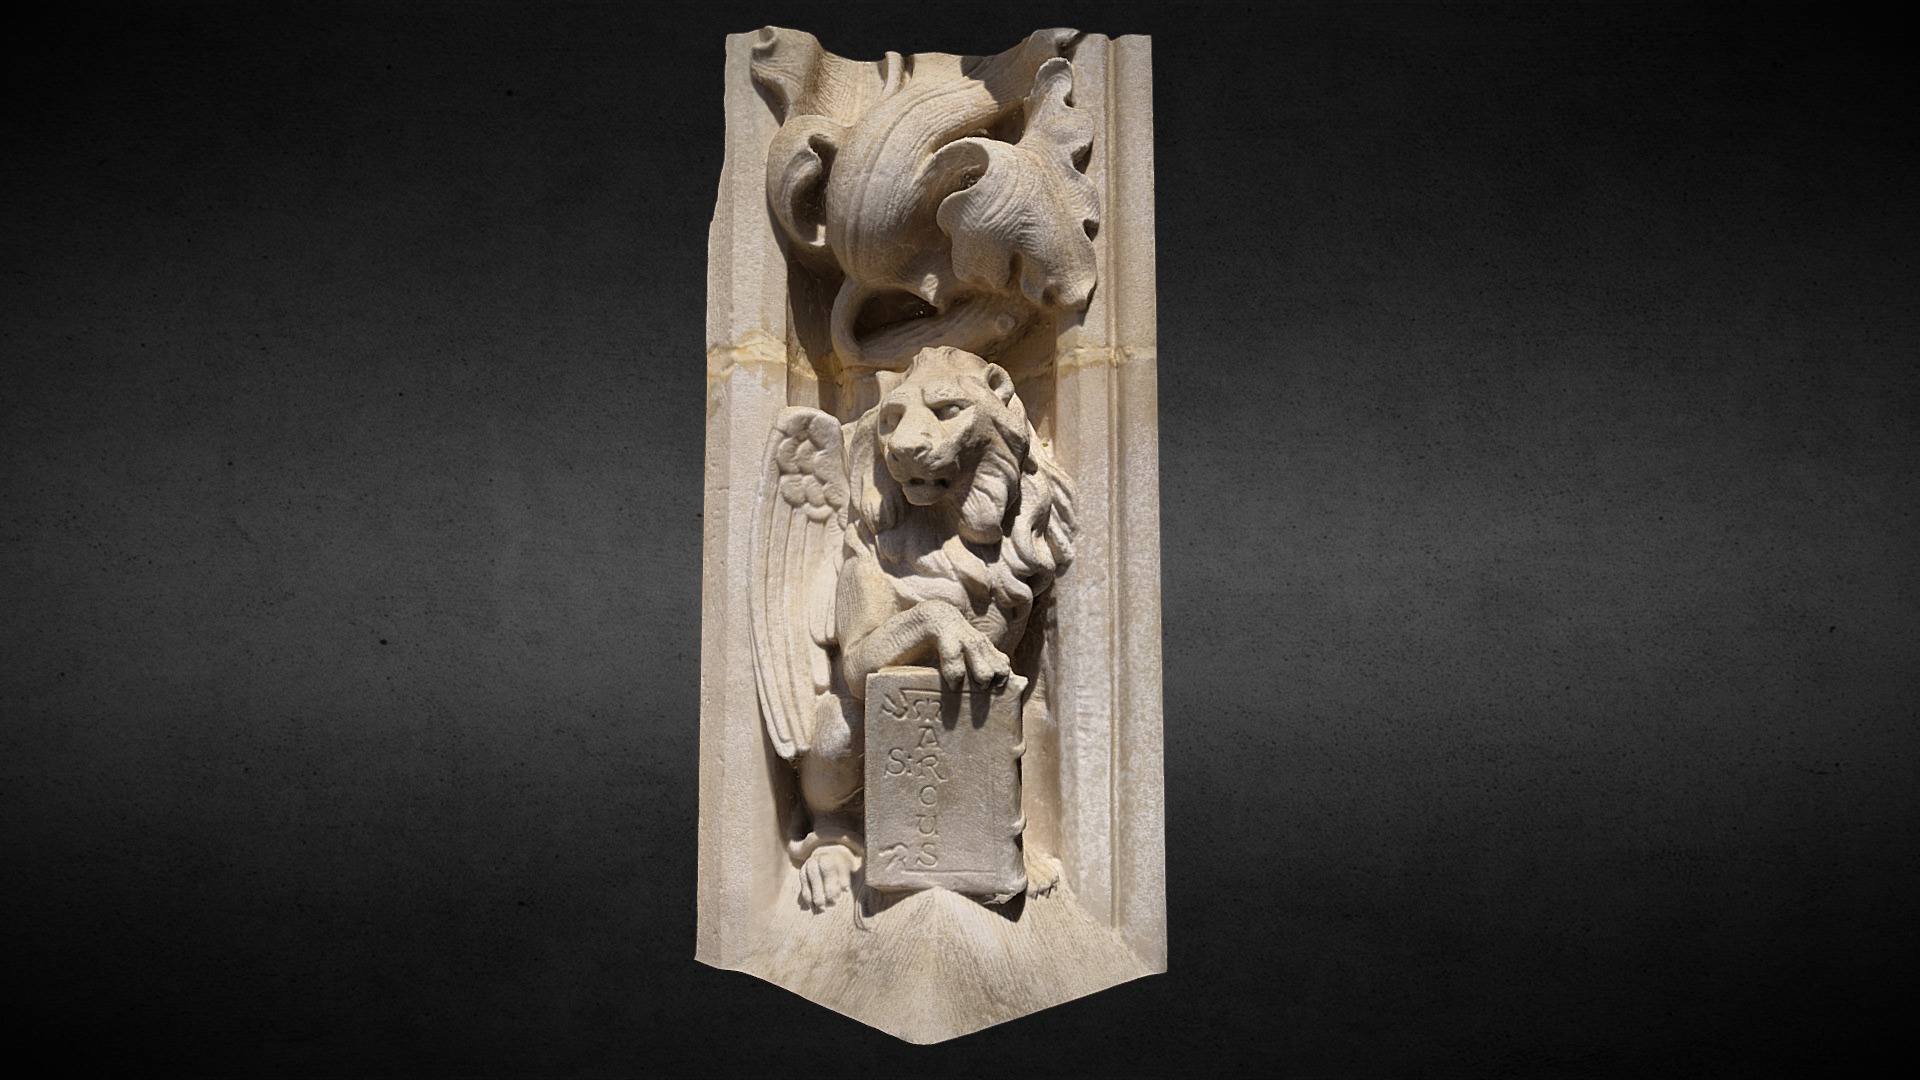 3D model Rhoaarr - This is a 3D model of the Rhoaarr. The 3D model is about a stone carving of a lion.